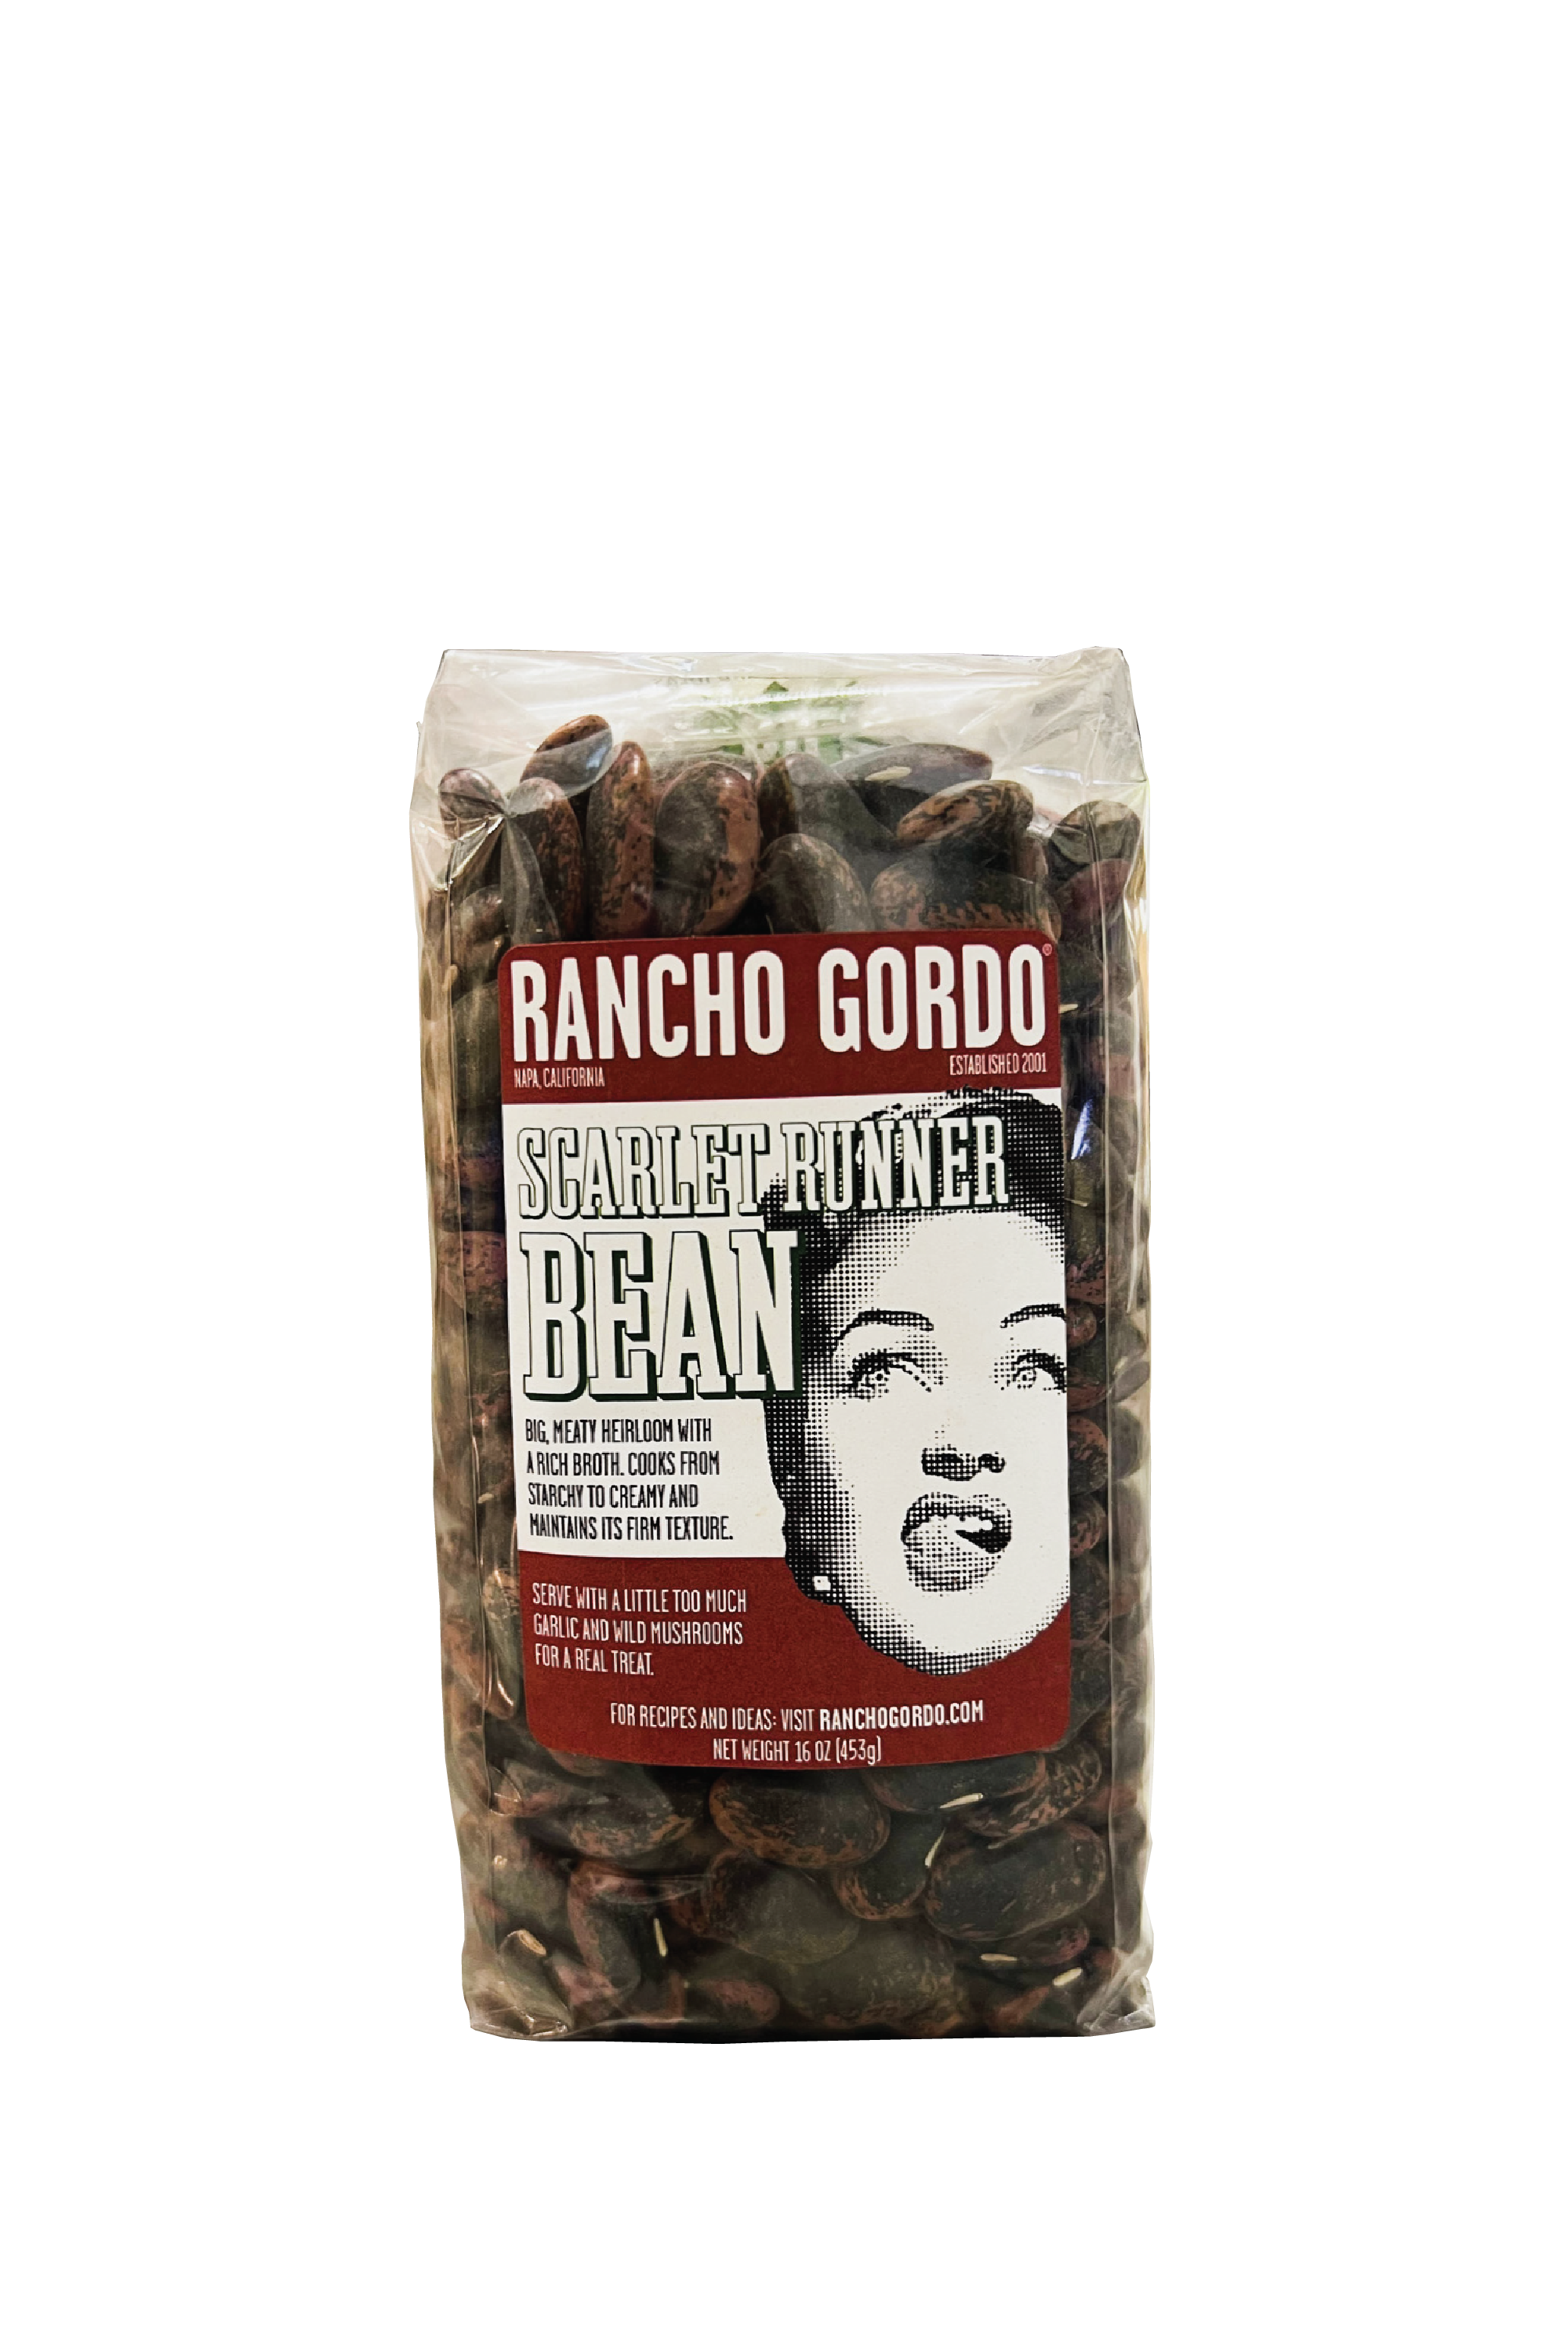 A One Pound Bag Of Rancho Gordo Scarlet Runner beans on a white background. Red and white label with an image of the face of a woman licking her upper lip. Additional text on bag reads: Big, meaty heirloom with a rich broth. Cooks from starchy to creamy and maintains its firm texture. Serve with a little too much garlic and wild mushrooms for a real treat.